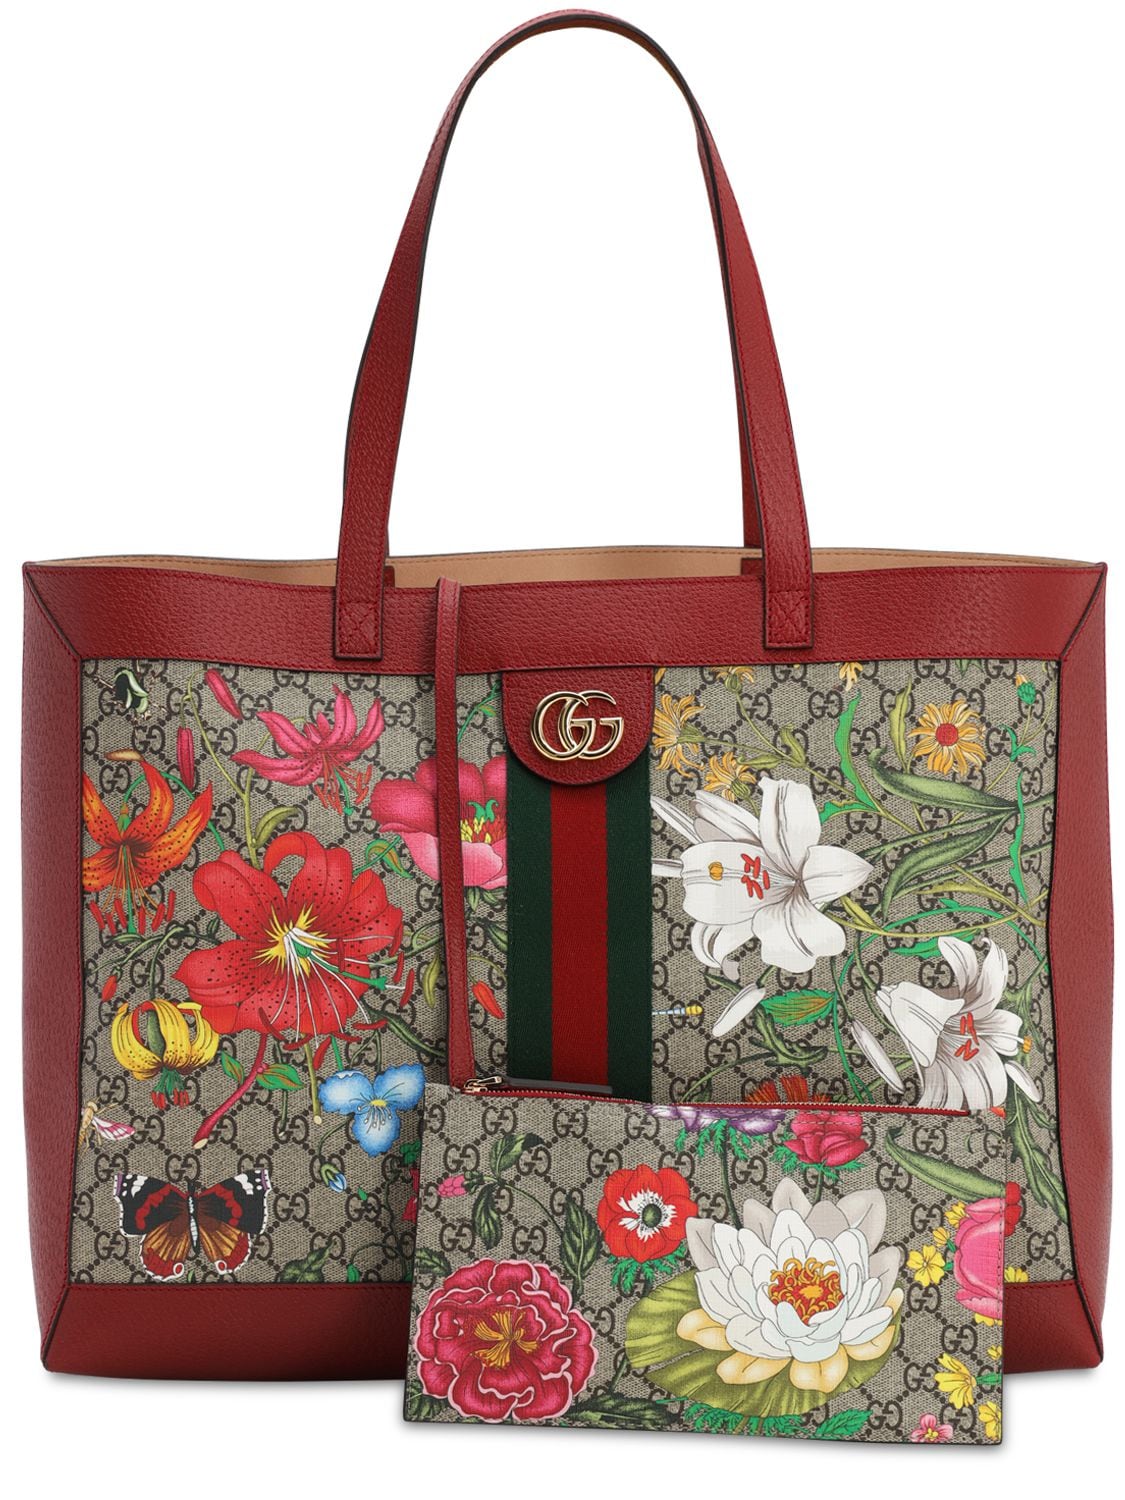 Gucci Gg Supreme Monogram Large Flora Web Ophidia Tote Bag Red | IUCN Water